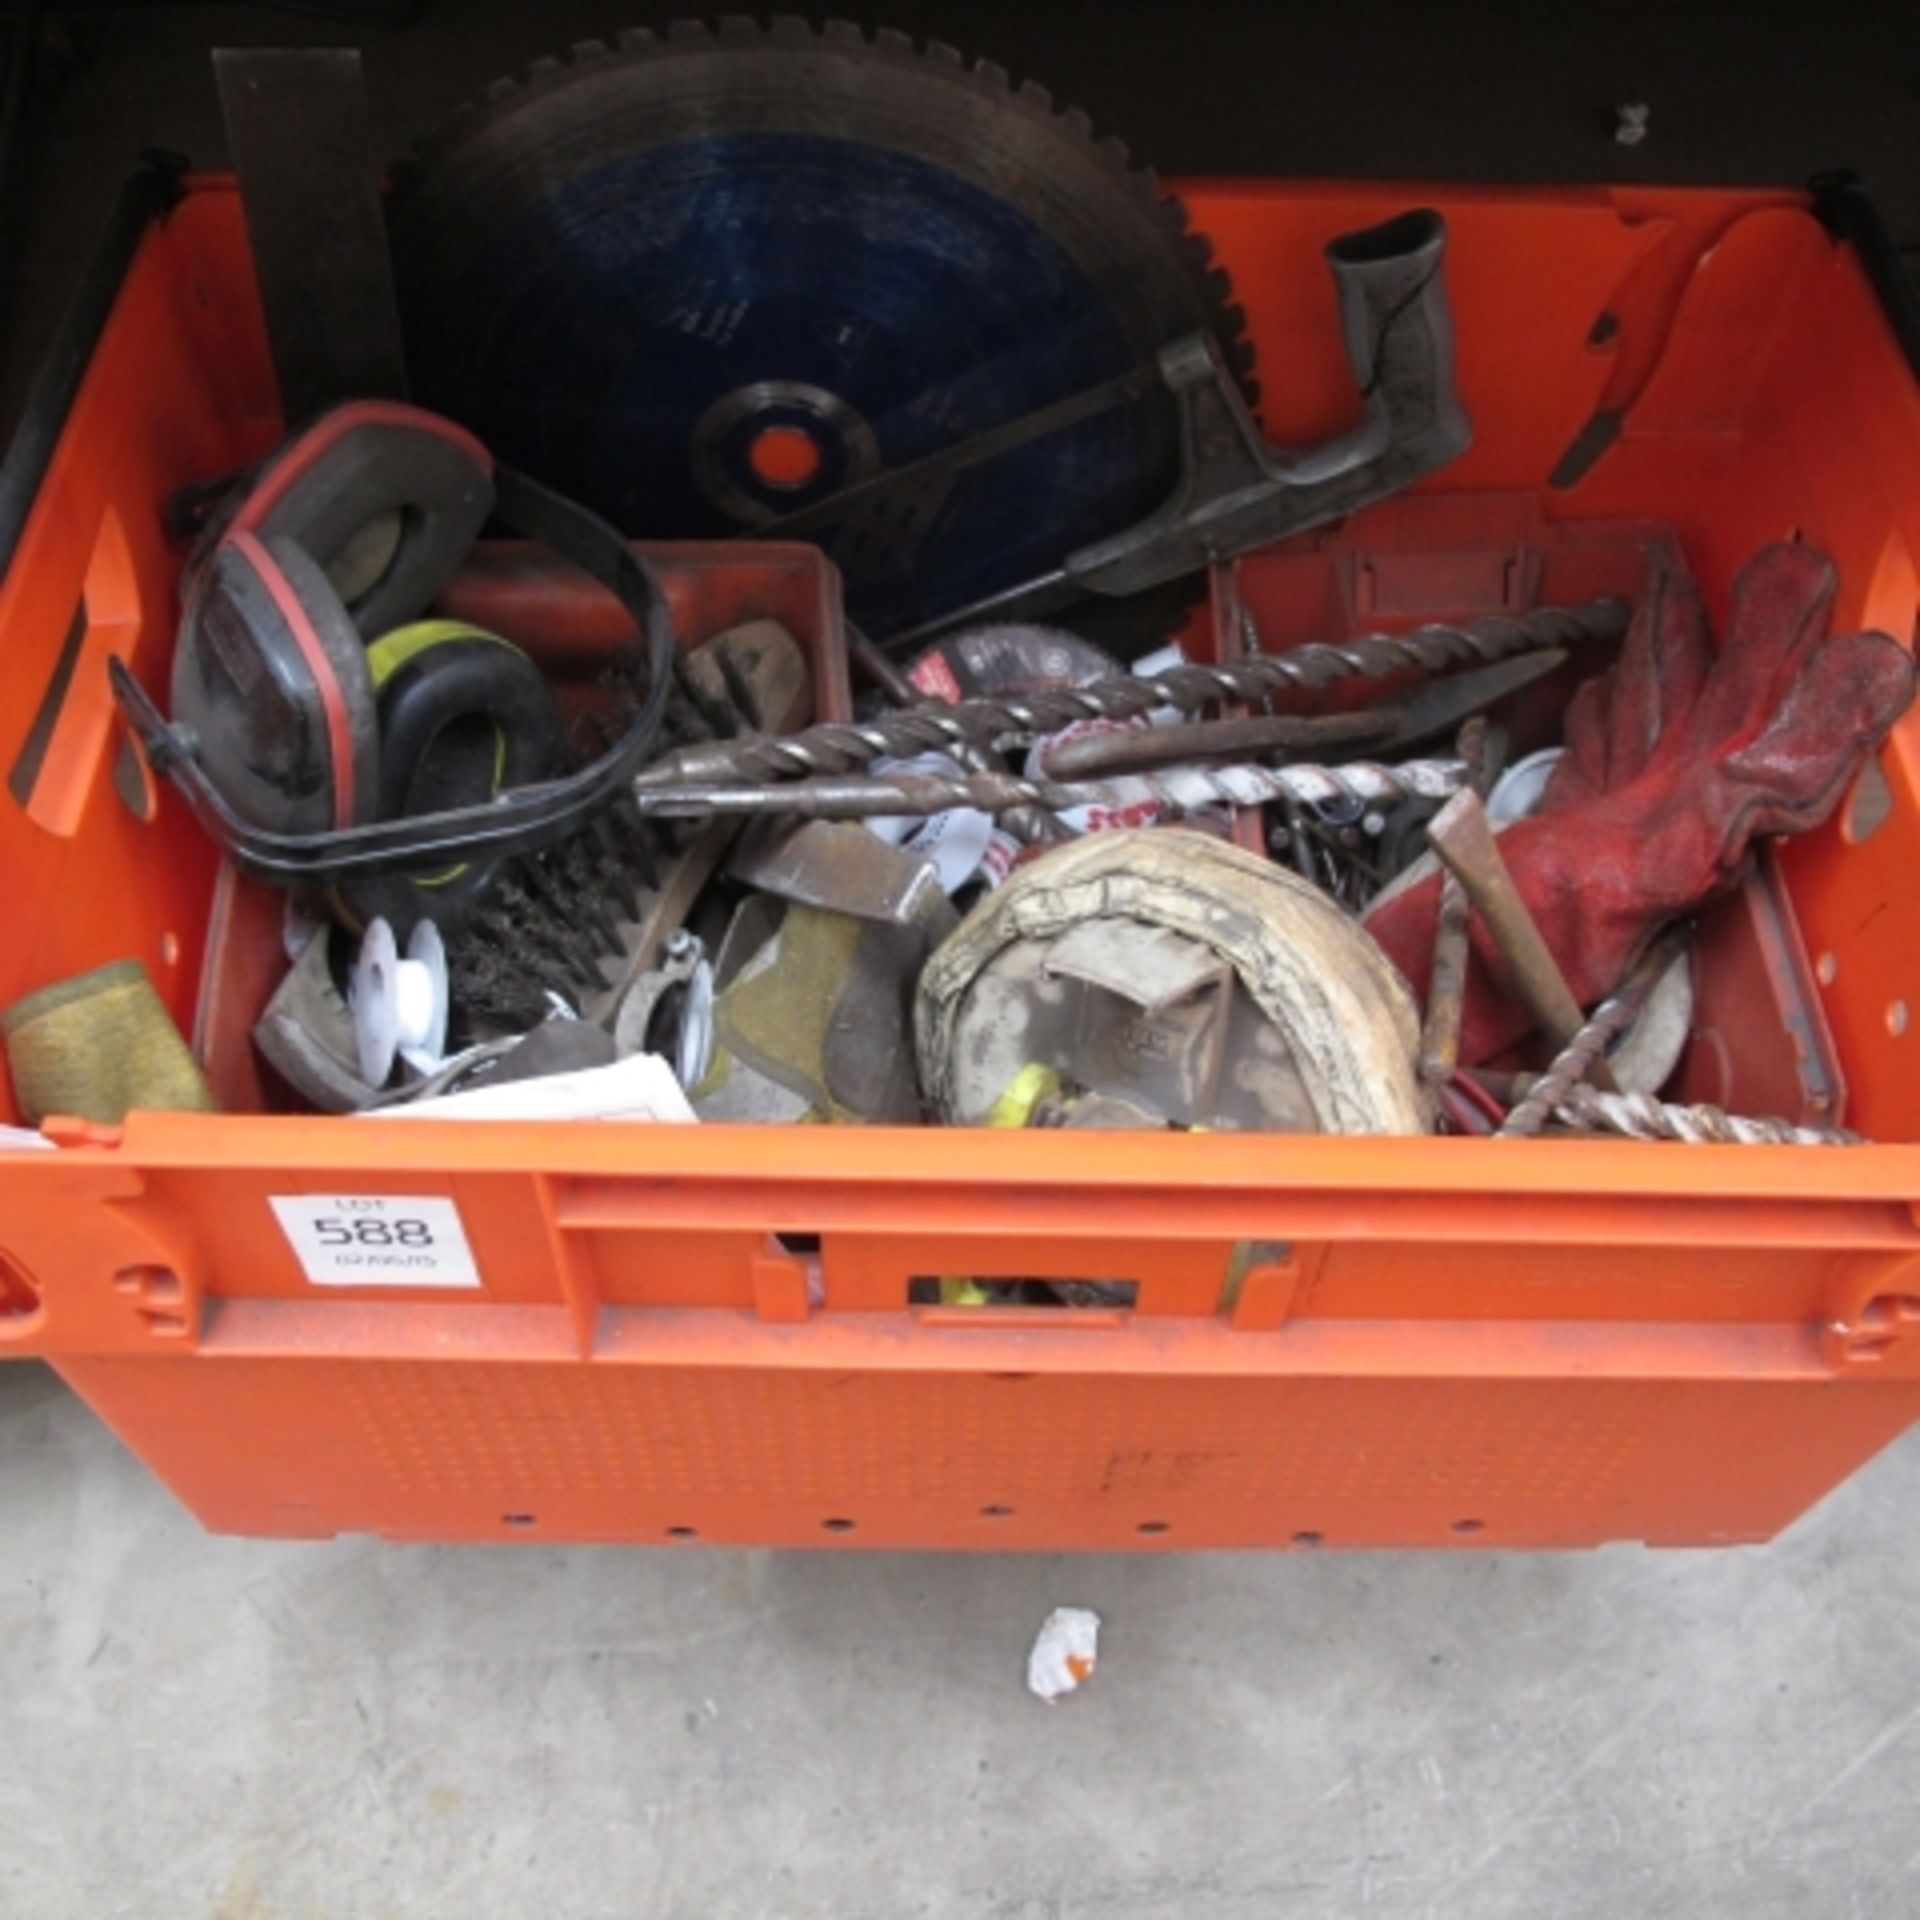 A box containing Drill Bits / Saw Blades /etc